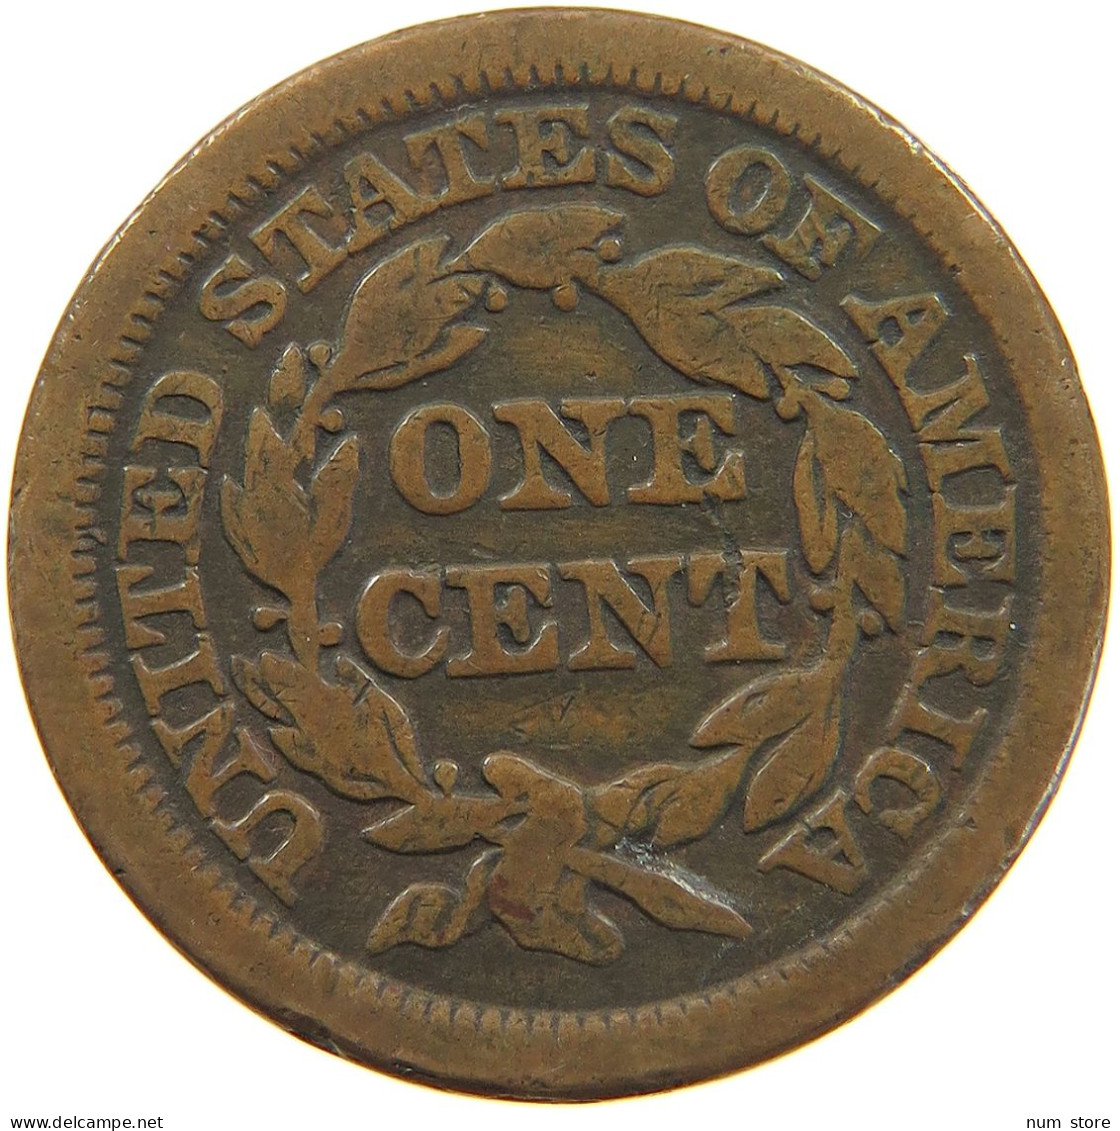 UNITED STATES OF AMERICA LARGE CENT 1848 BRAIDED HAIR #t114 1073 - 1840-1857: Braided Hair (Cheveux Tressés)